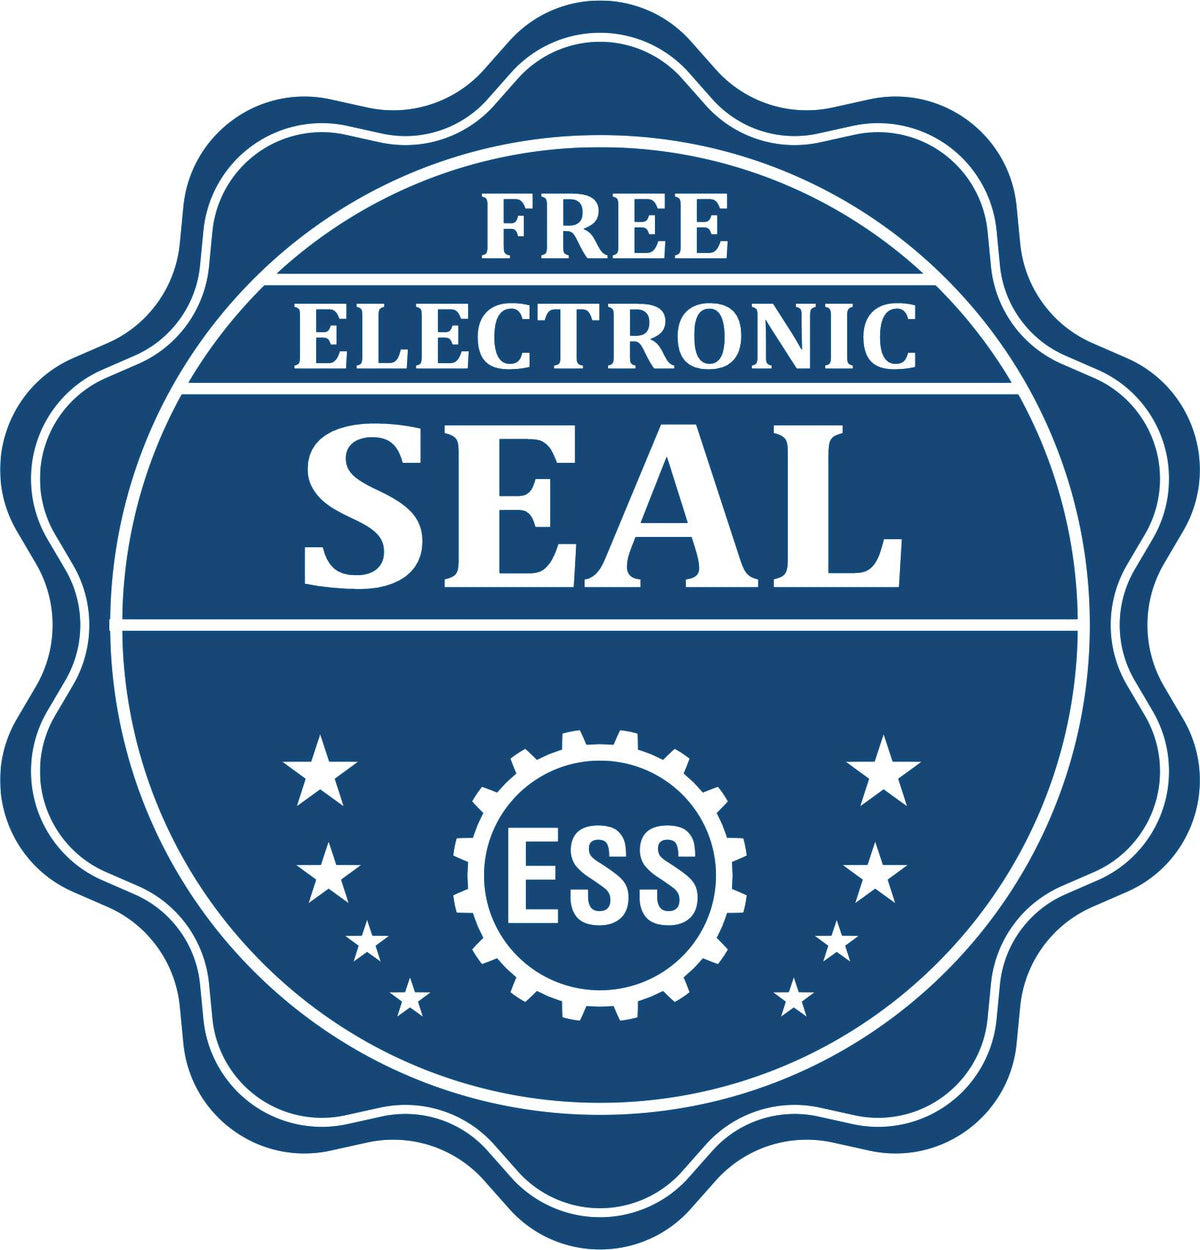 A badge showing a free electronic seal for the Hybrid Kentucky Geologist Seal with stars and the ESS gear on the emblem.